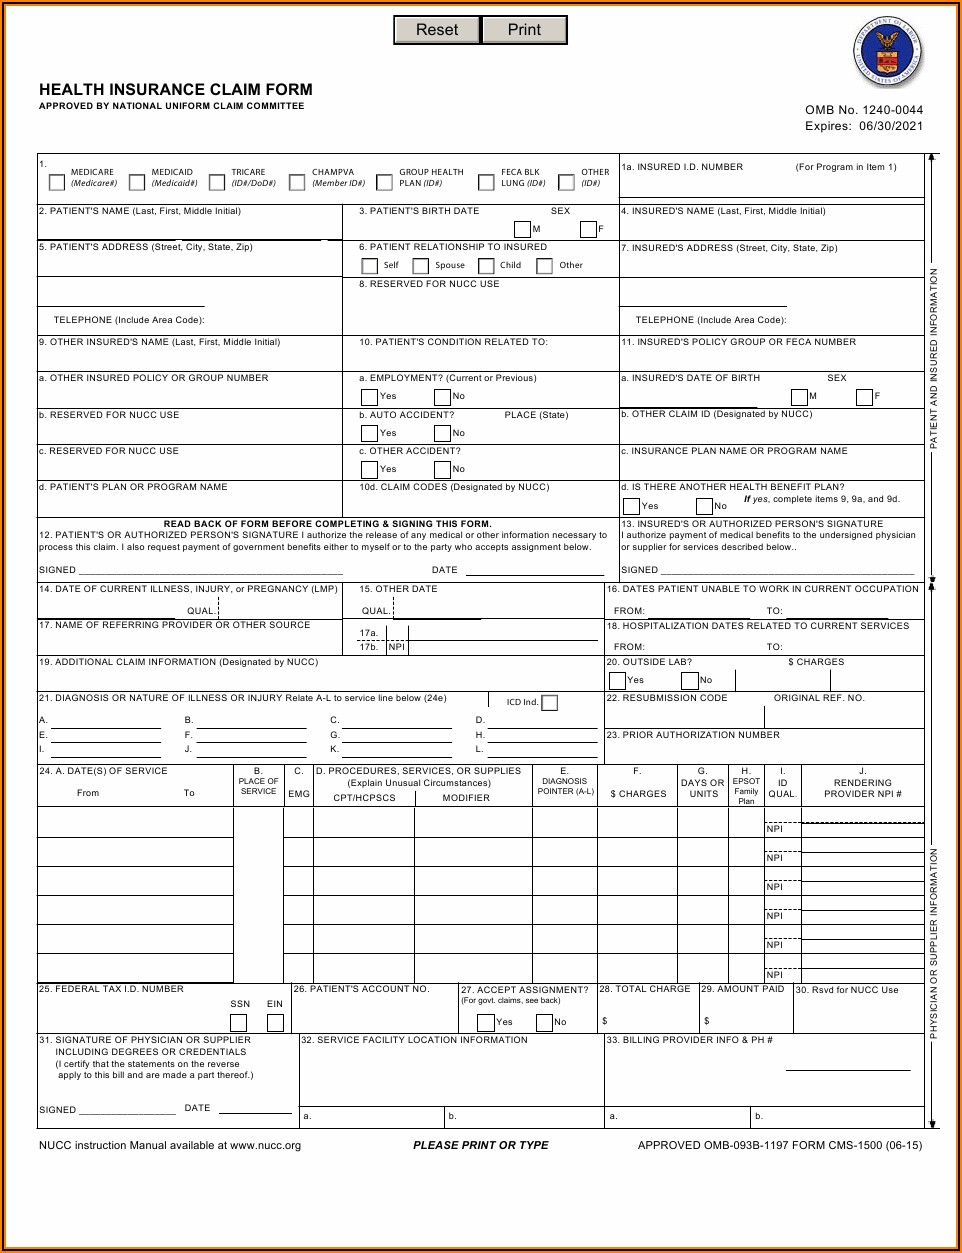 Health Insurance Claim Form 1500 Fillable